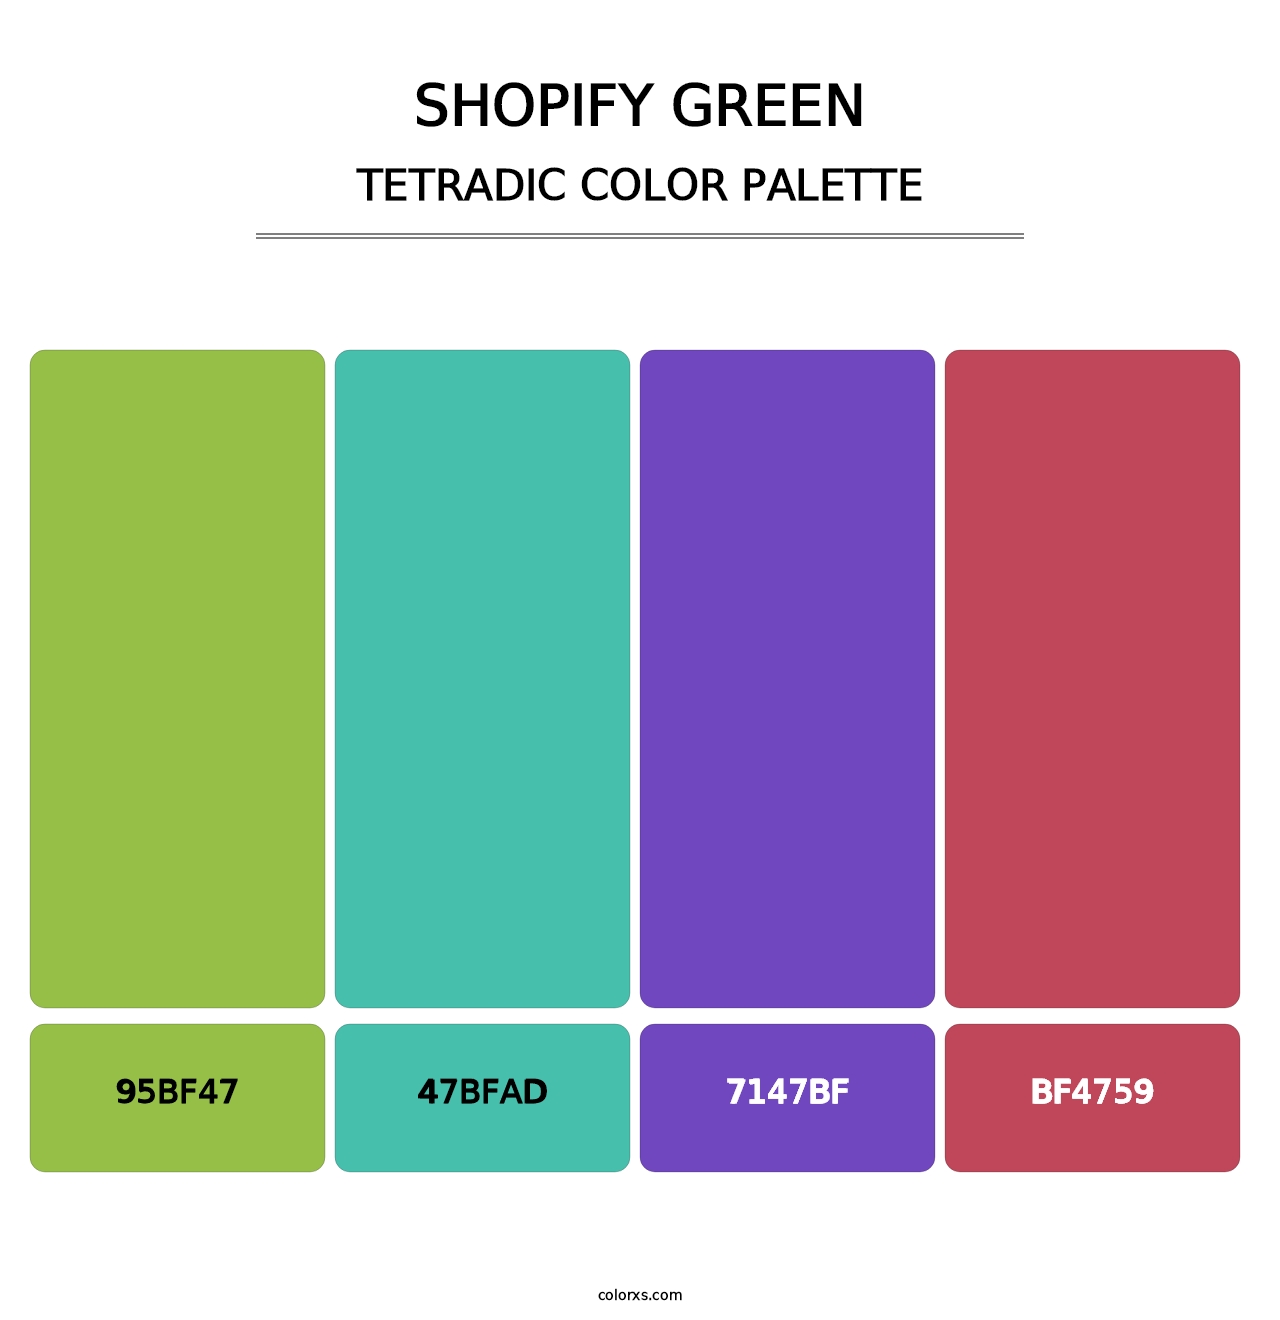 Shopify Green - Tetradic Color Palette